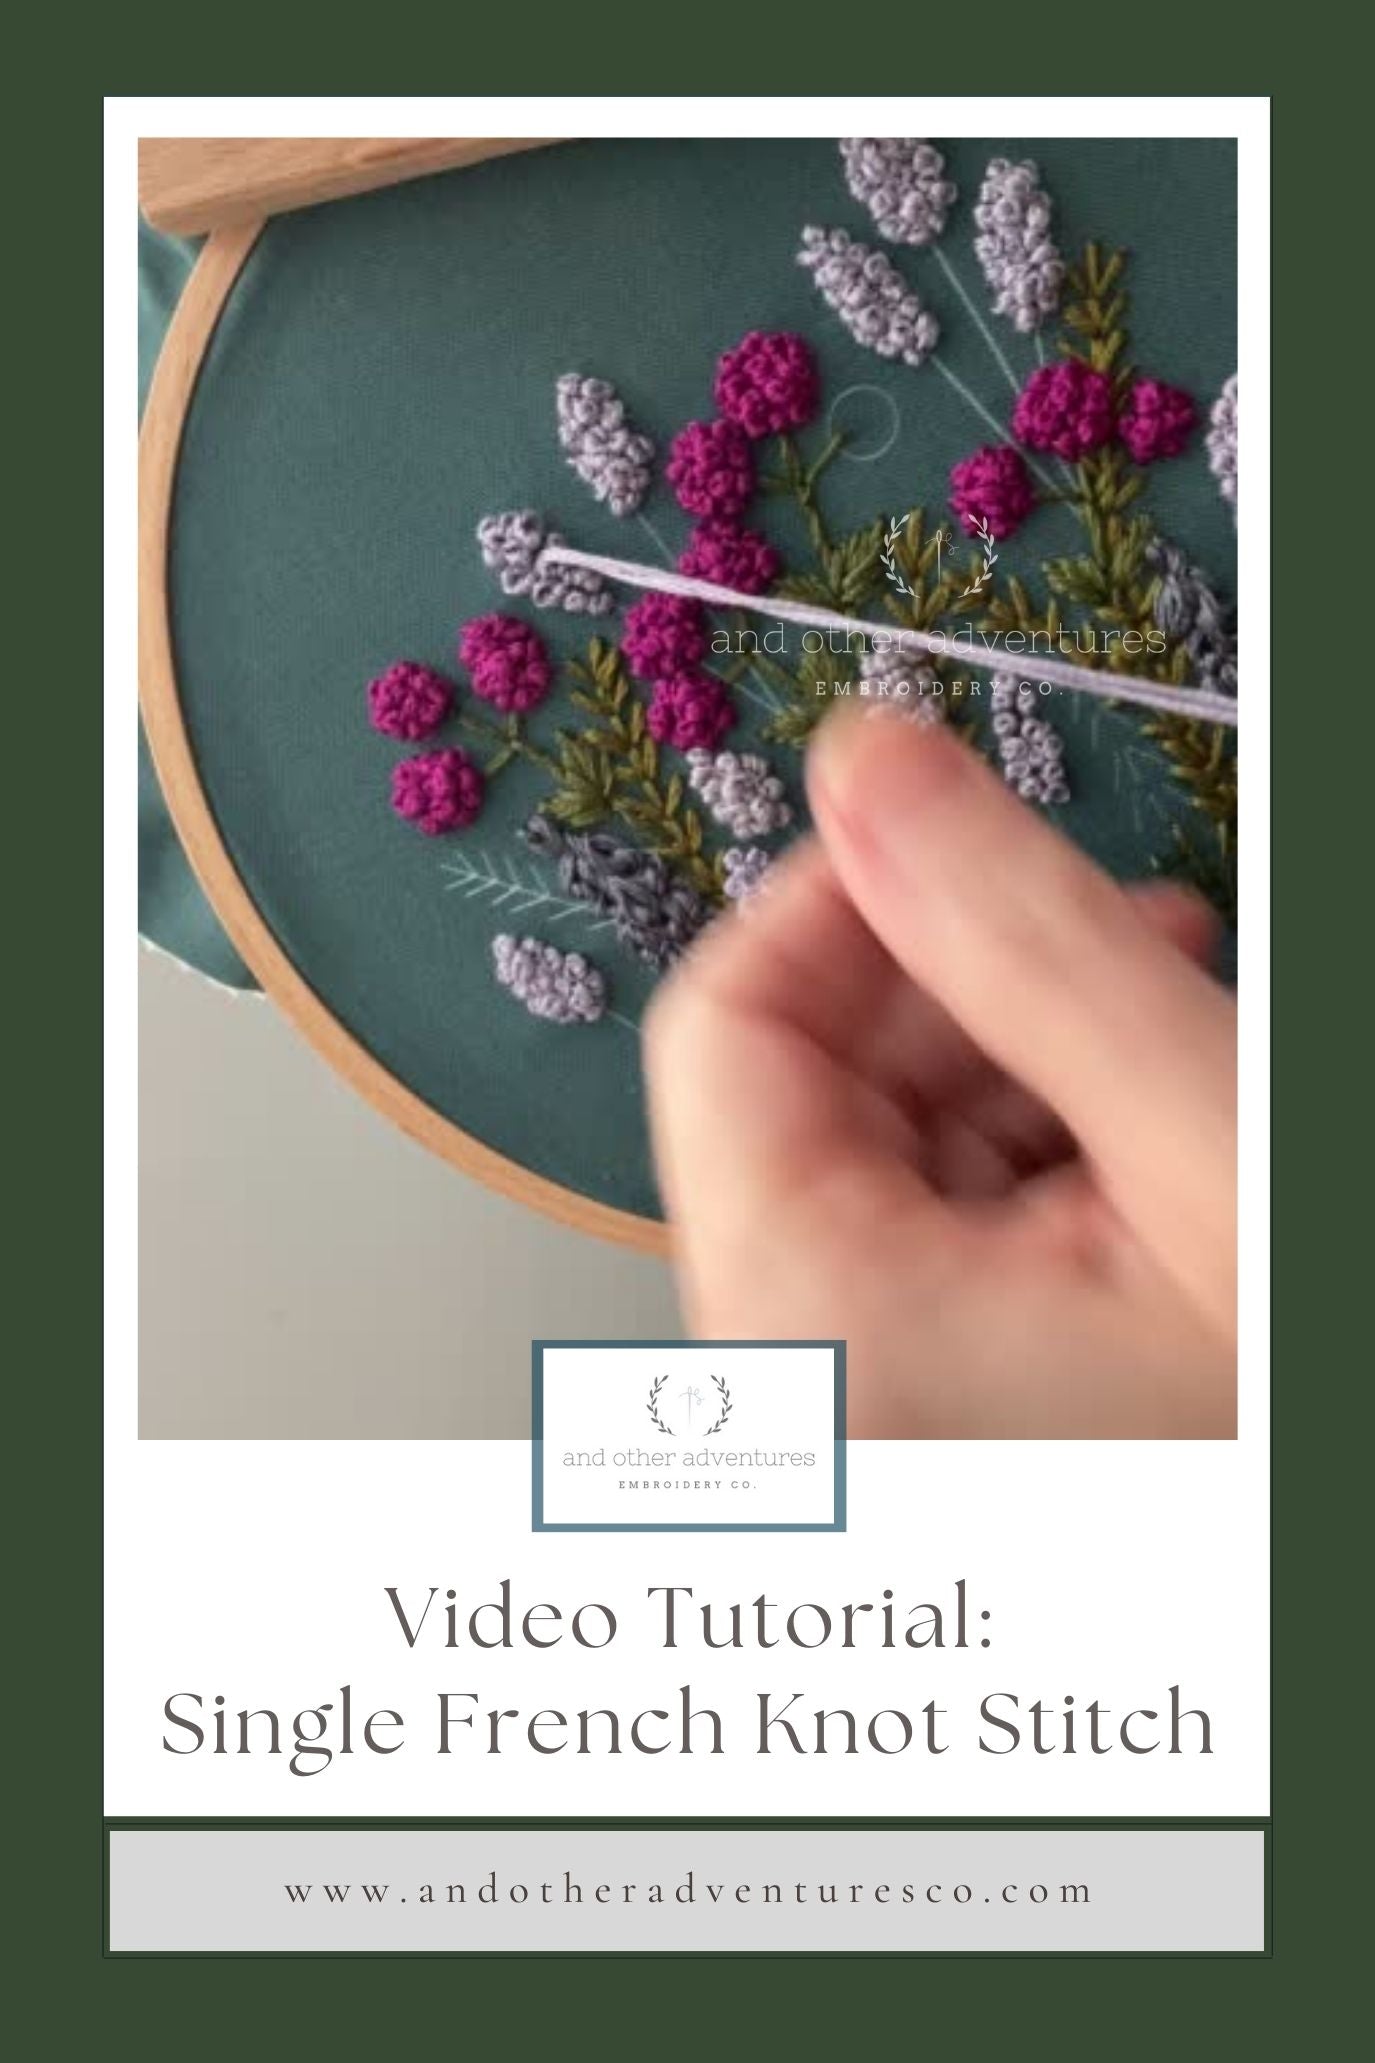 Video Tutorial: Single French Knot Hand Embroidery by And Other Adventures Embroidery Co